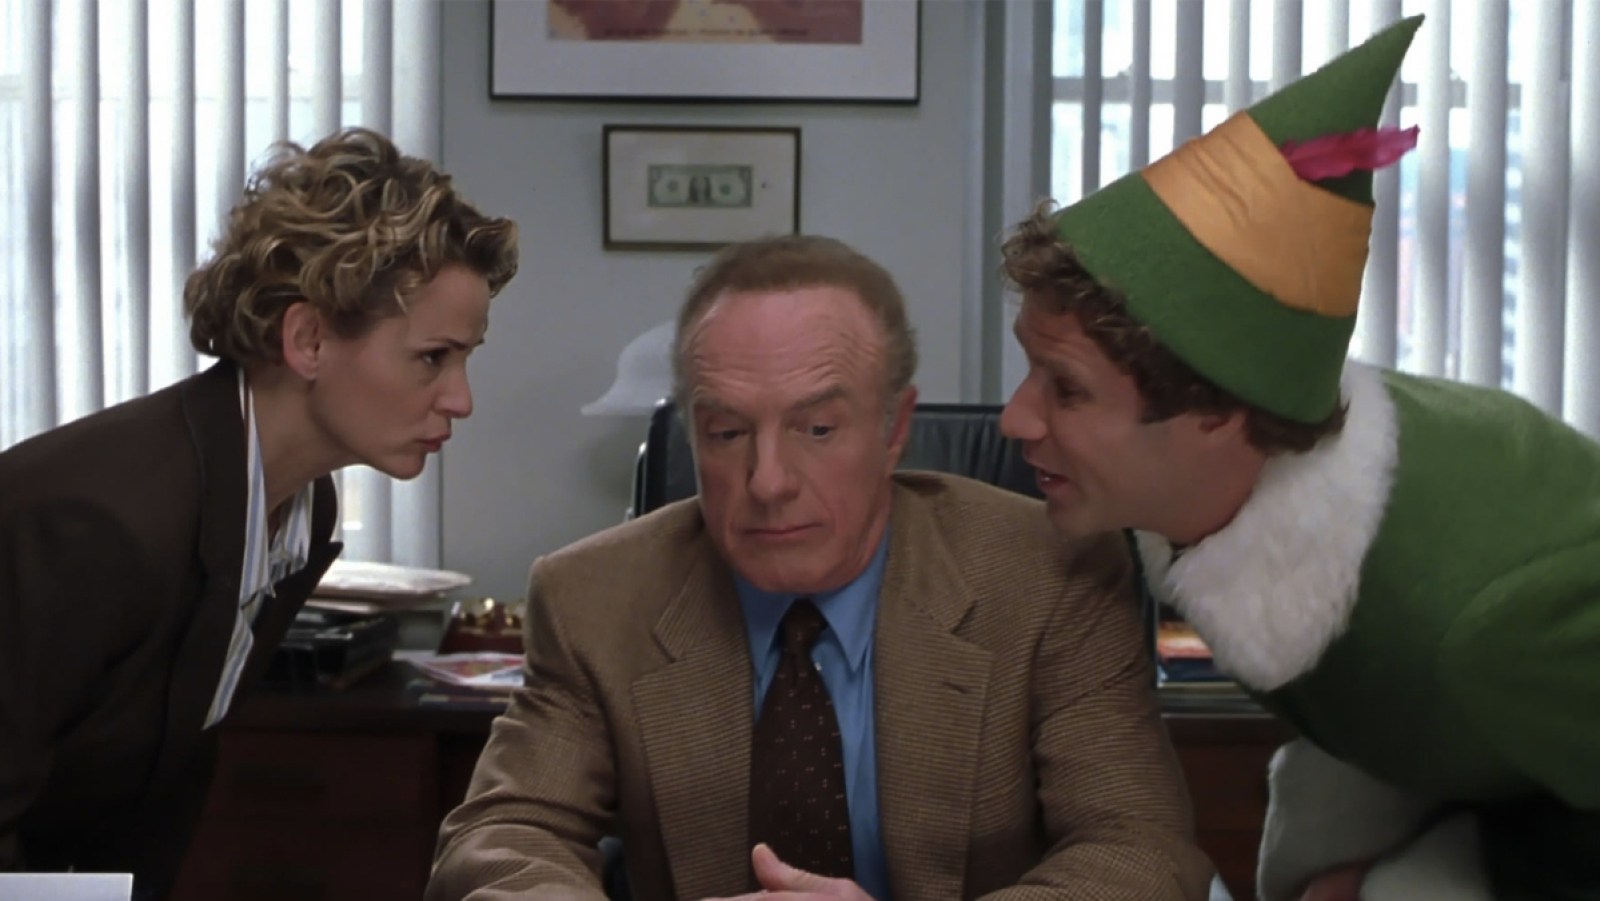 James Caan as Walter Hobbs and Will Ferrell as Buddy in Elf